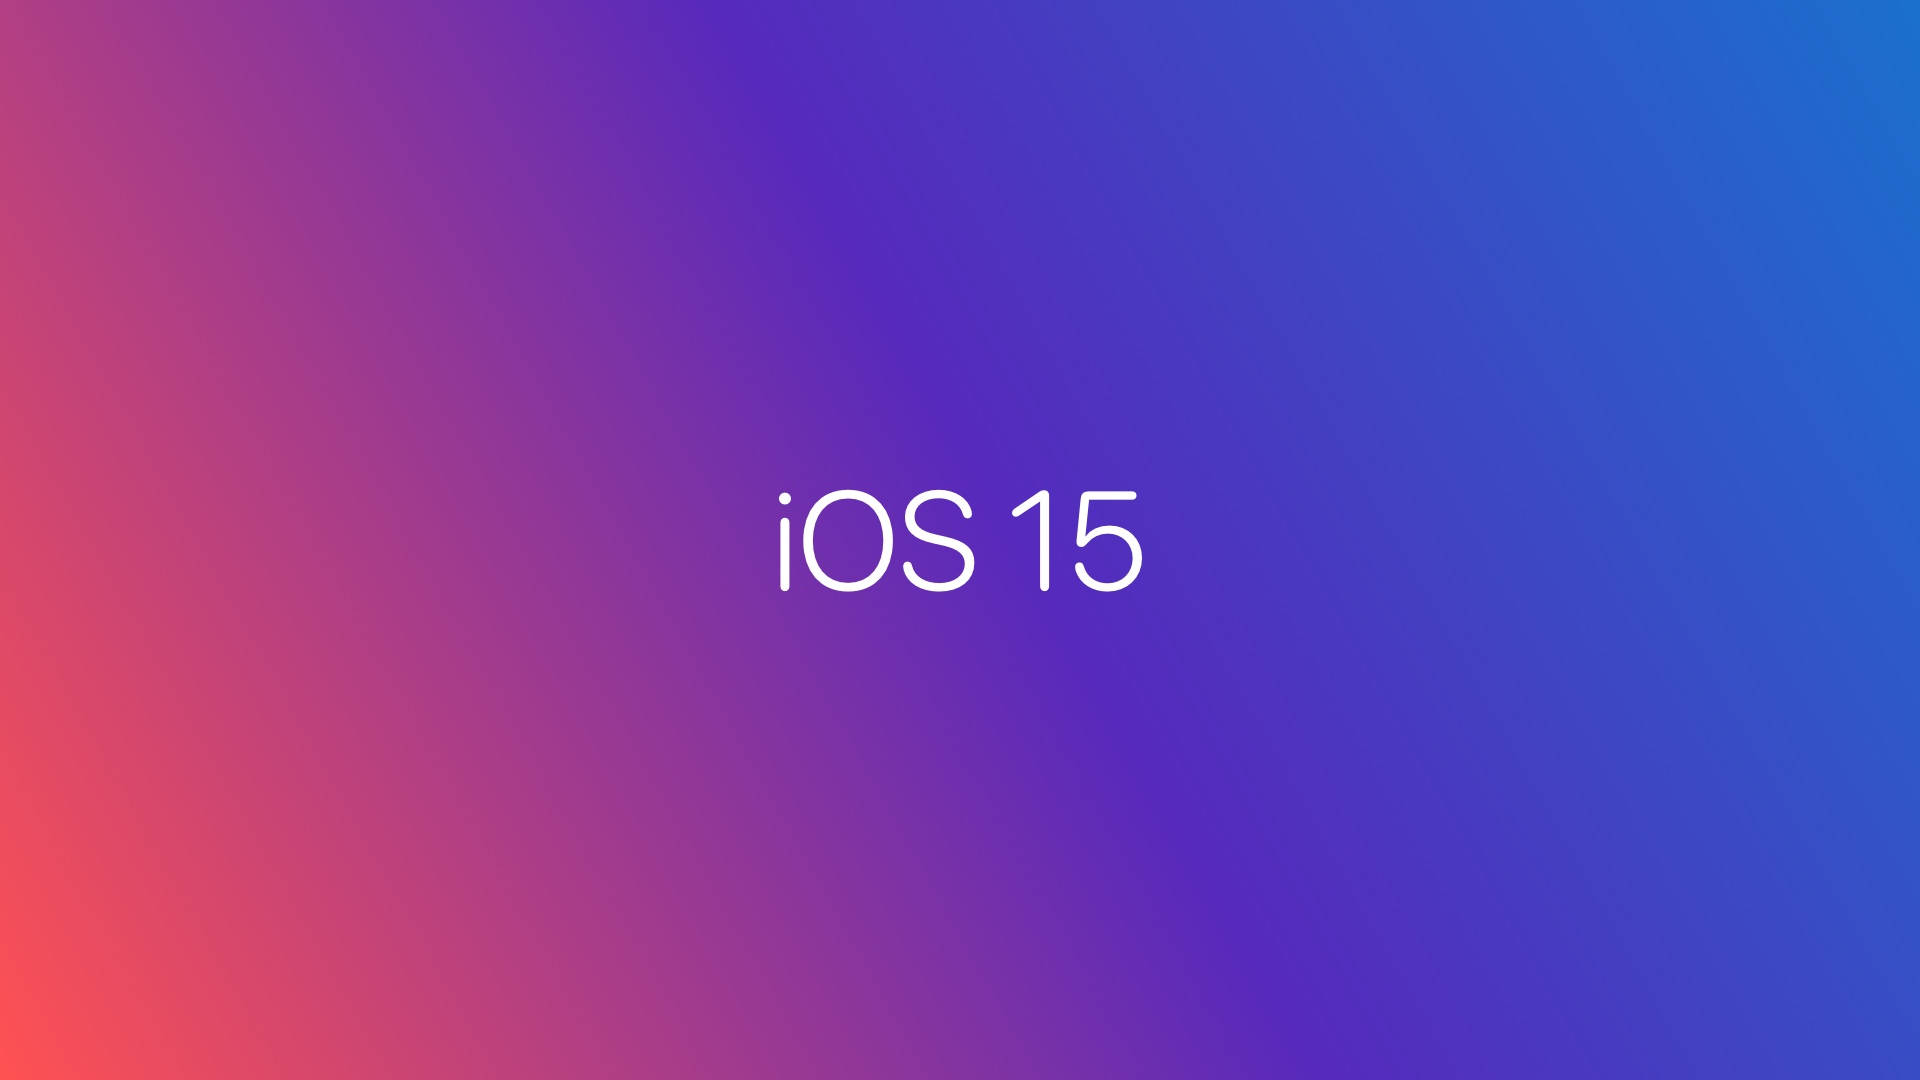 Ios 15 1920X1080 Wallpaper and Background Image